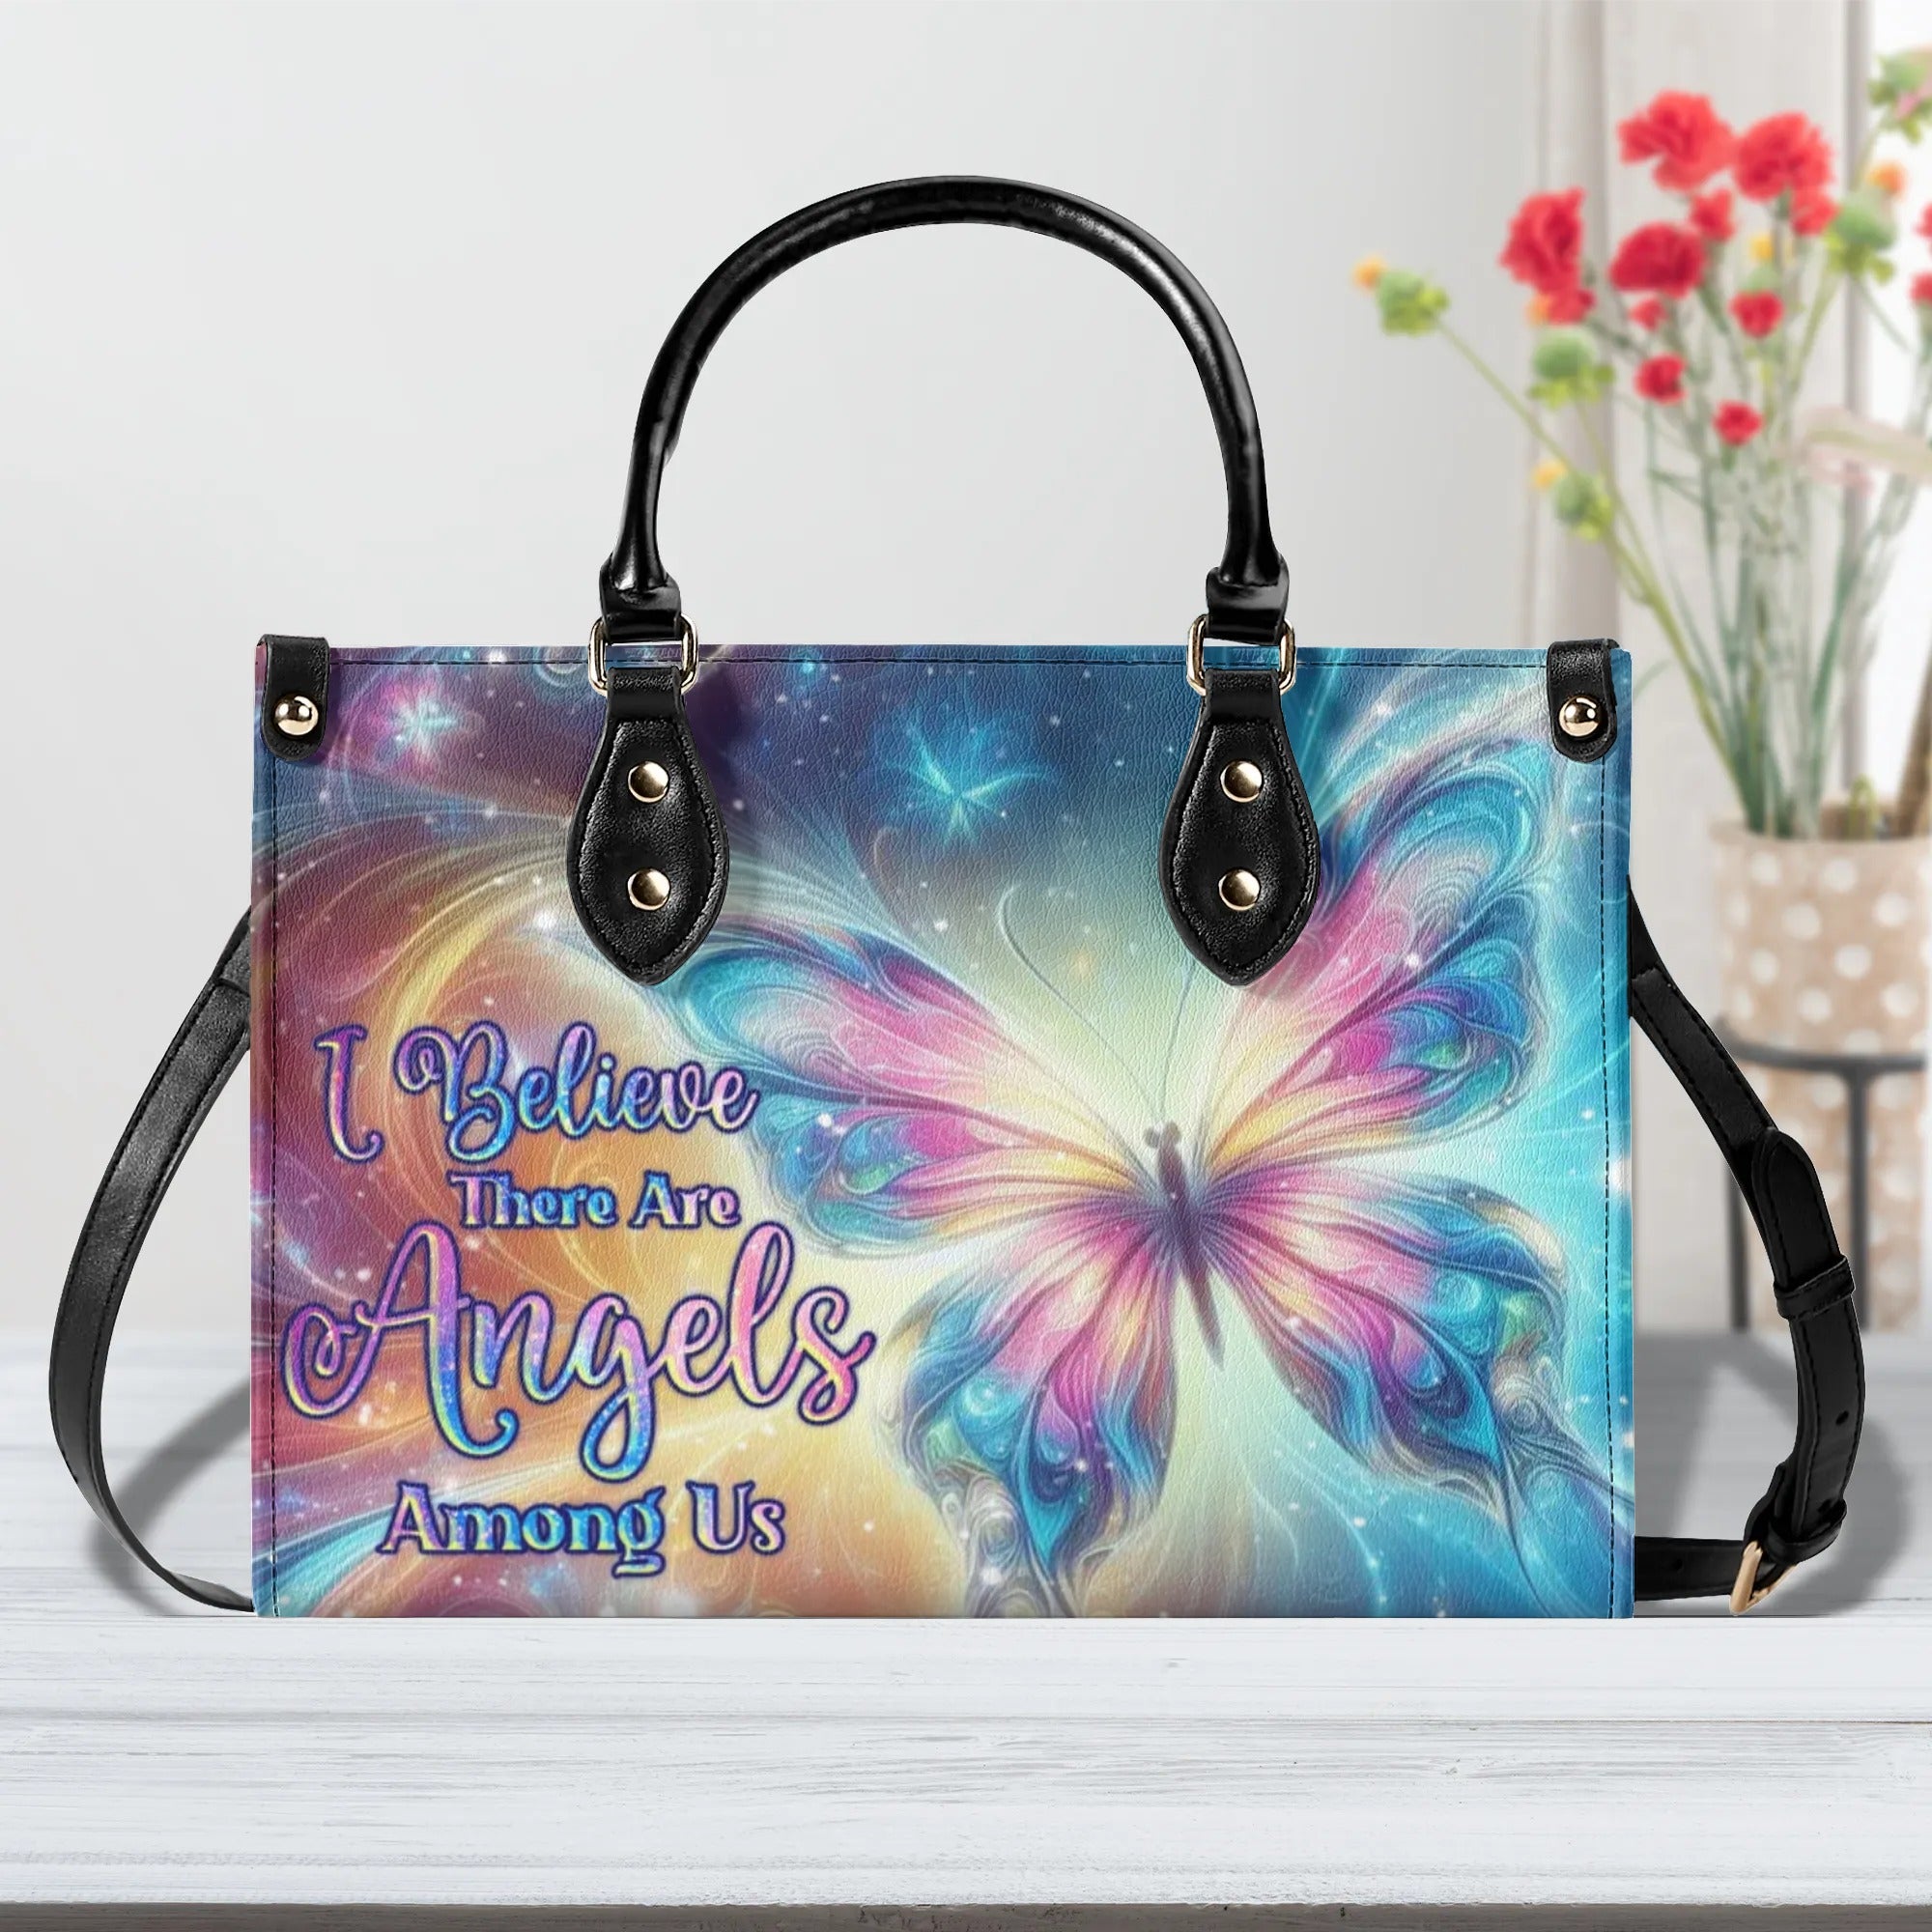 I BELIEVE THERE ARE ANGELS AMONG US LEATHER HANDBAG - TLNZ2905245